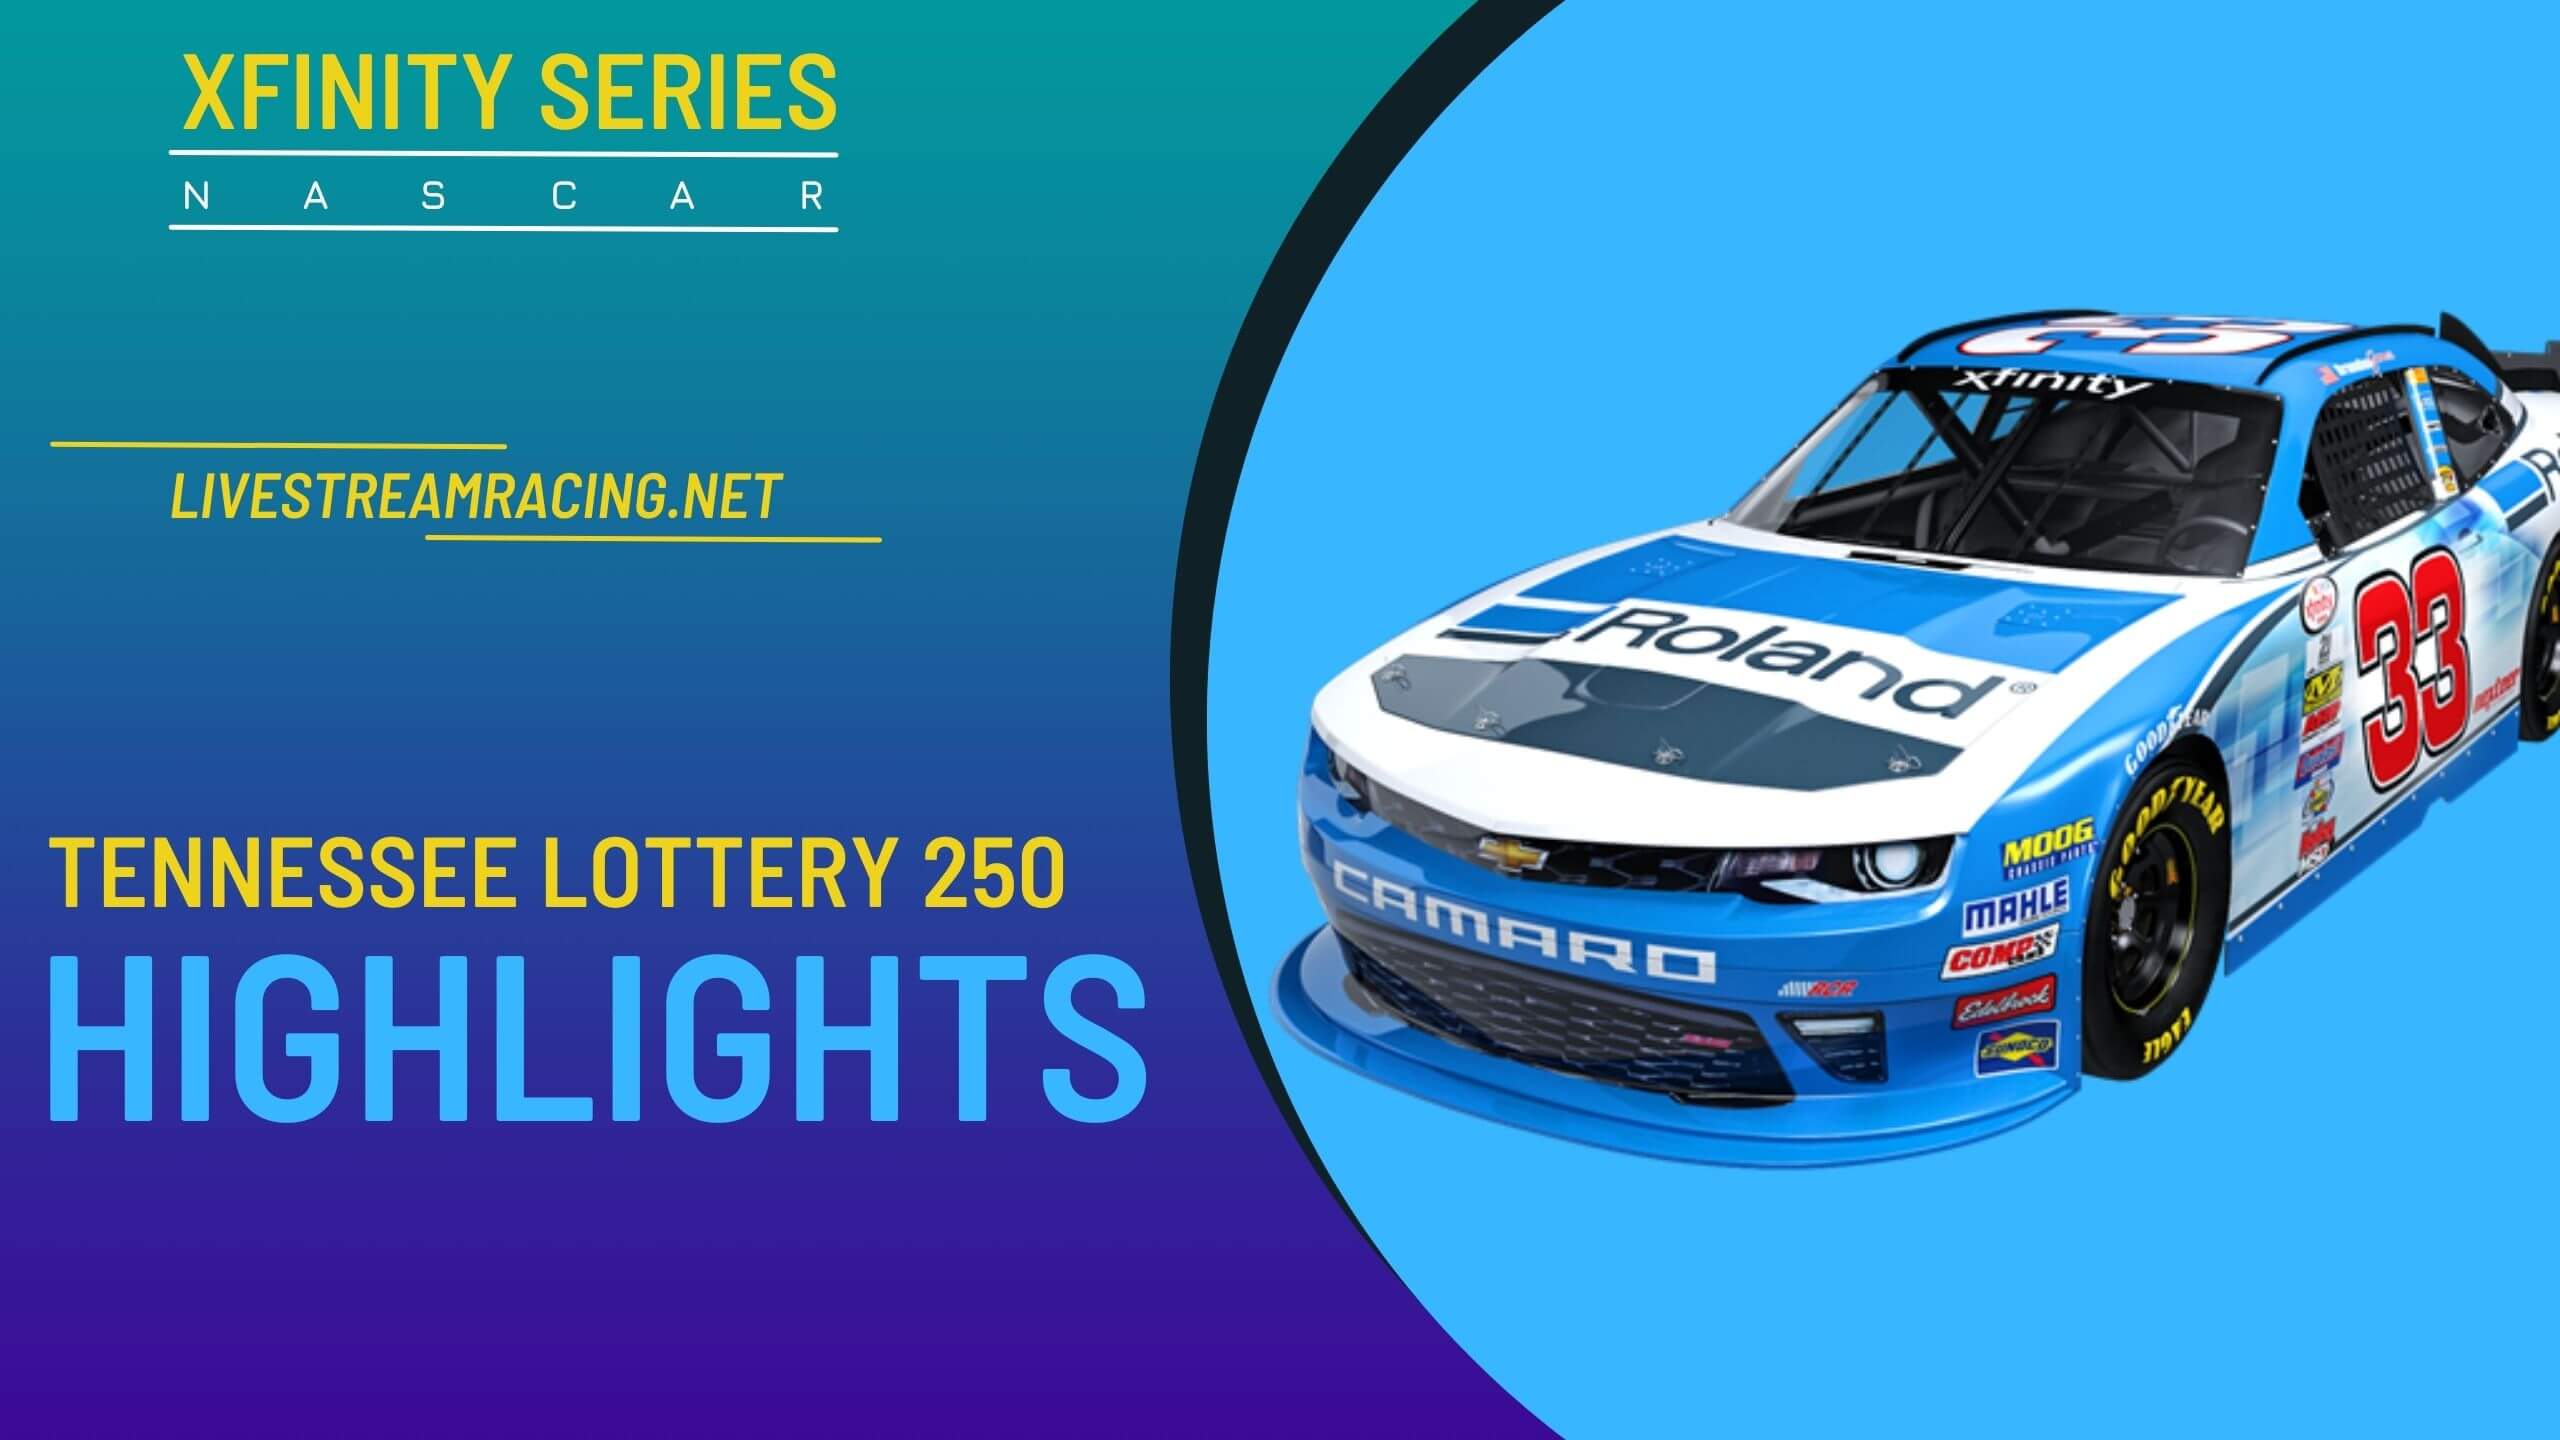 Tennessee Lottery 250 Nascar Highlights 2022 Xfinity Series